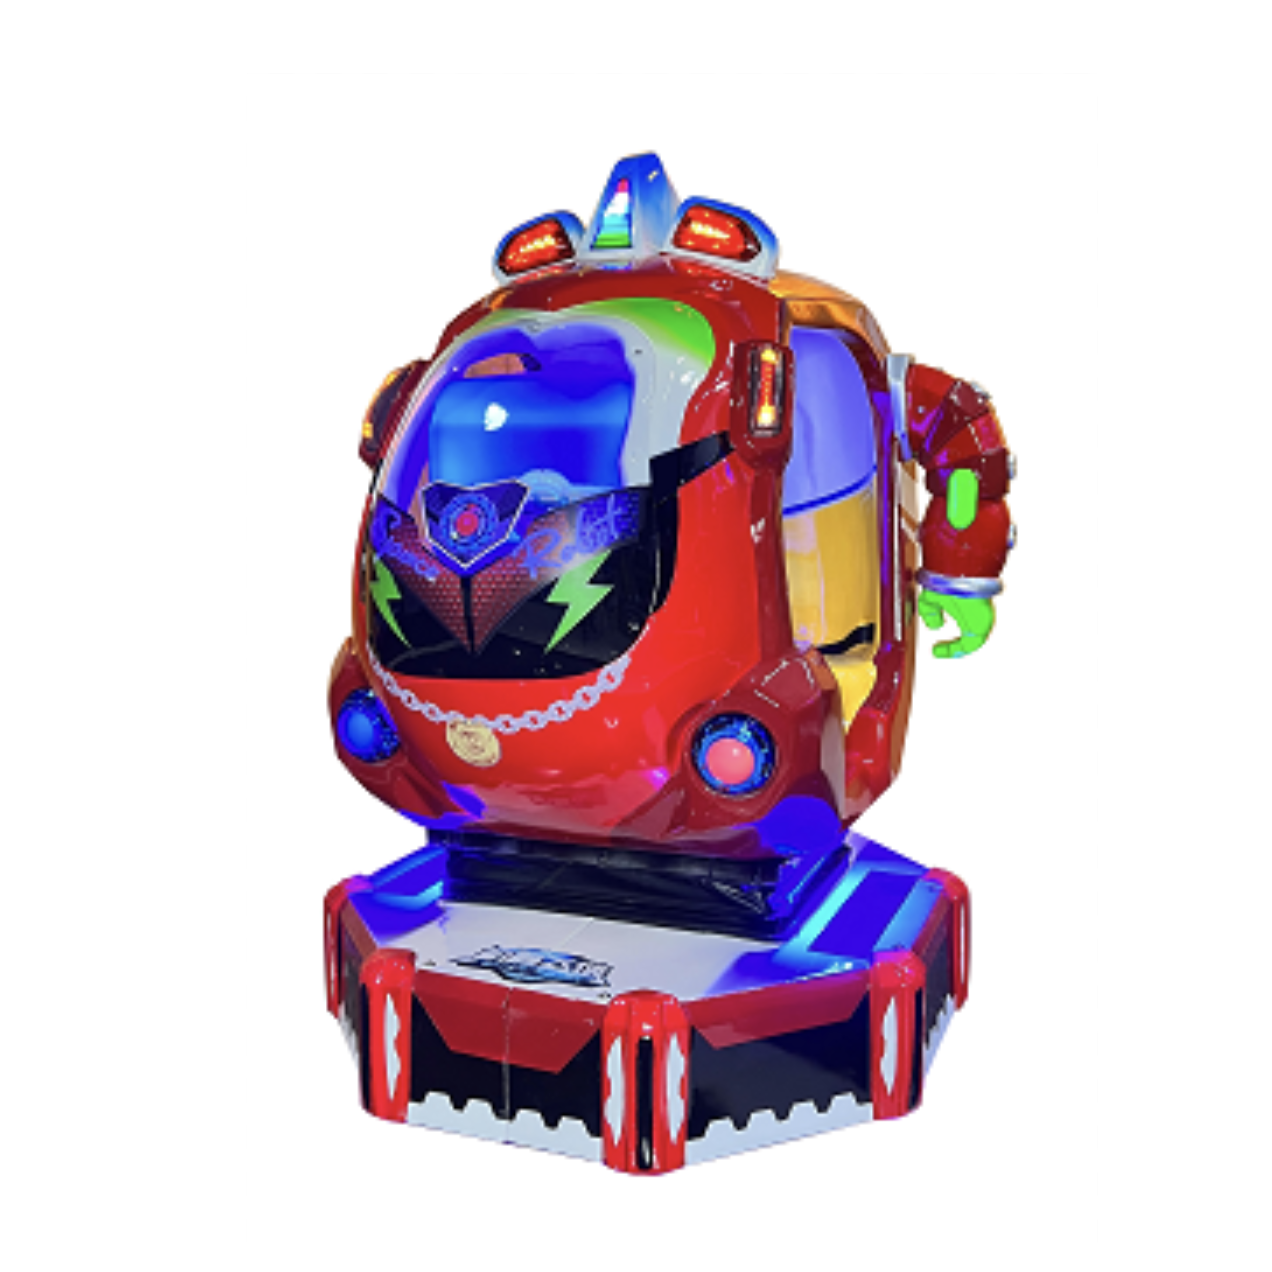 Latest Helicopter Style Coin Operated Kiddie Vehicles For Sale Made In China